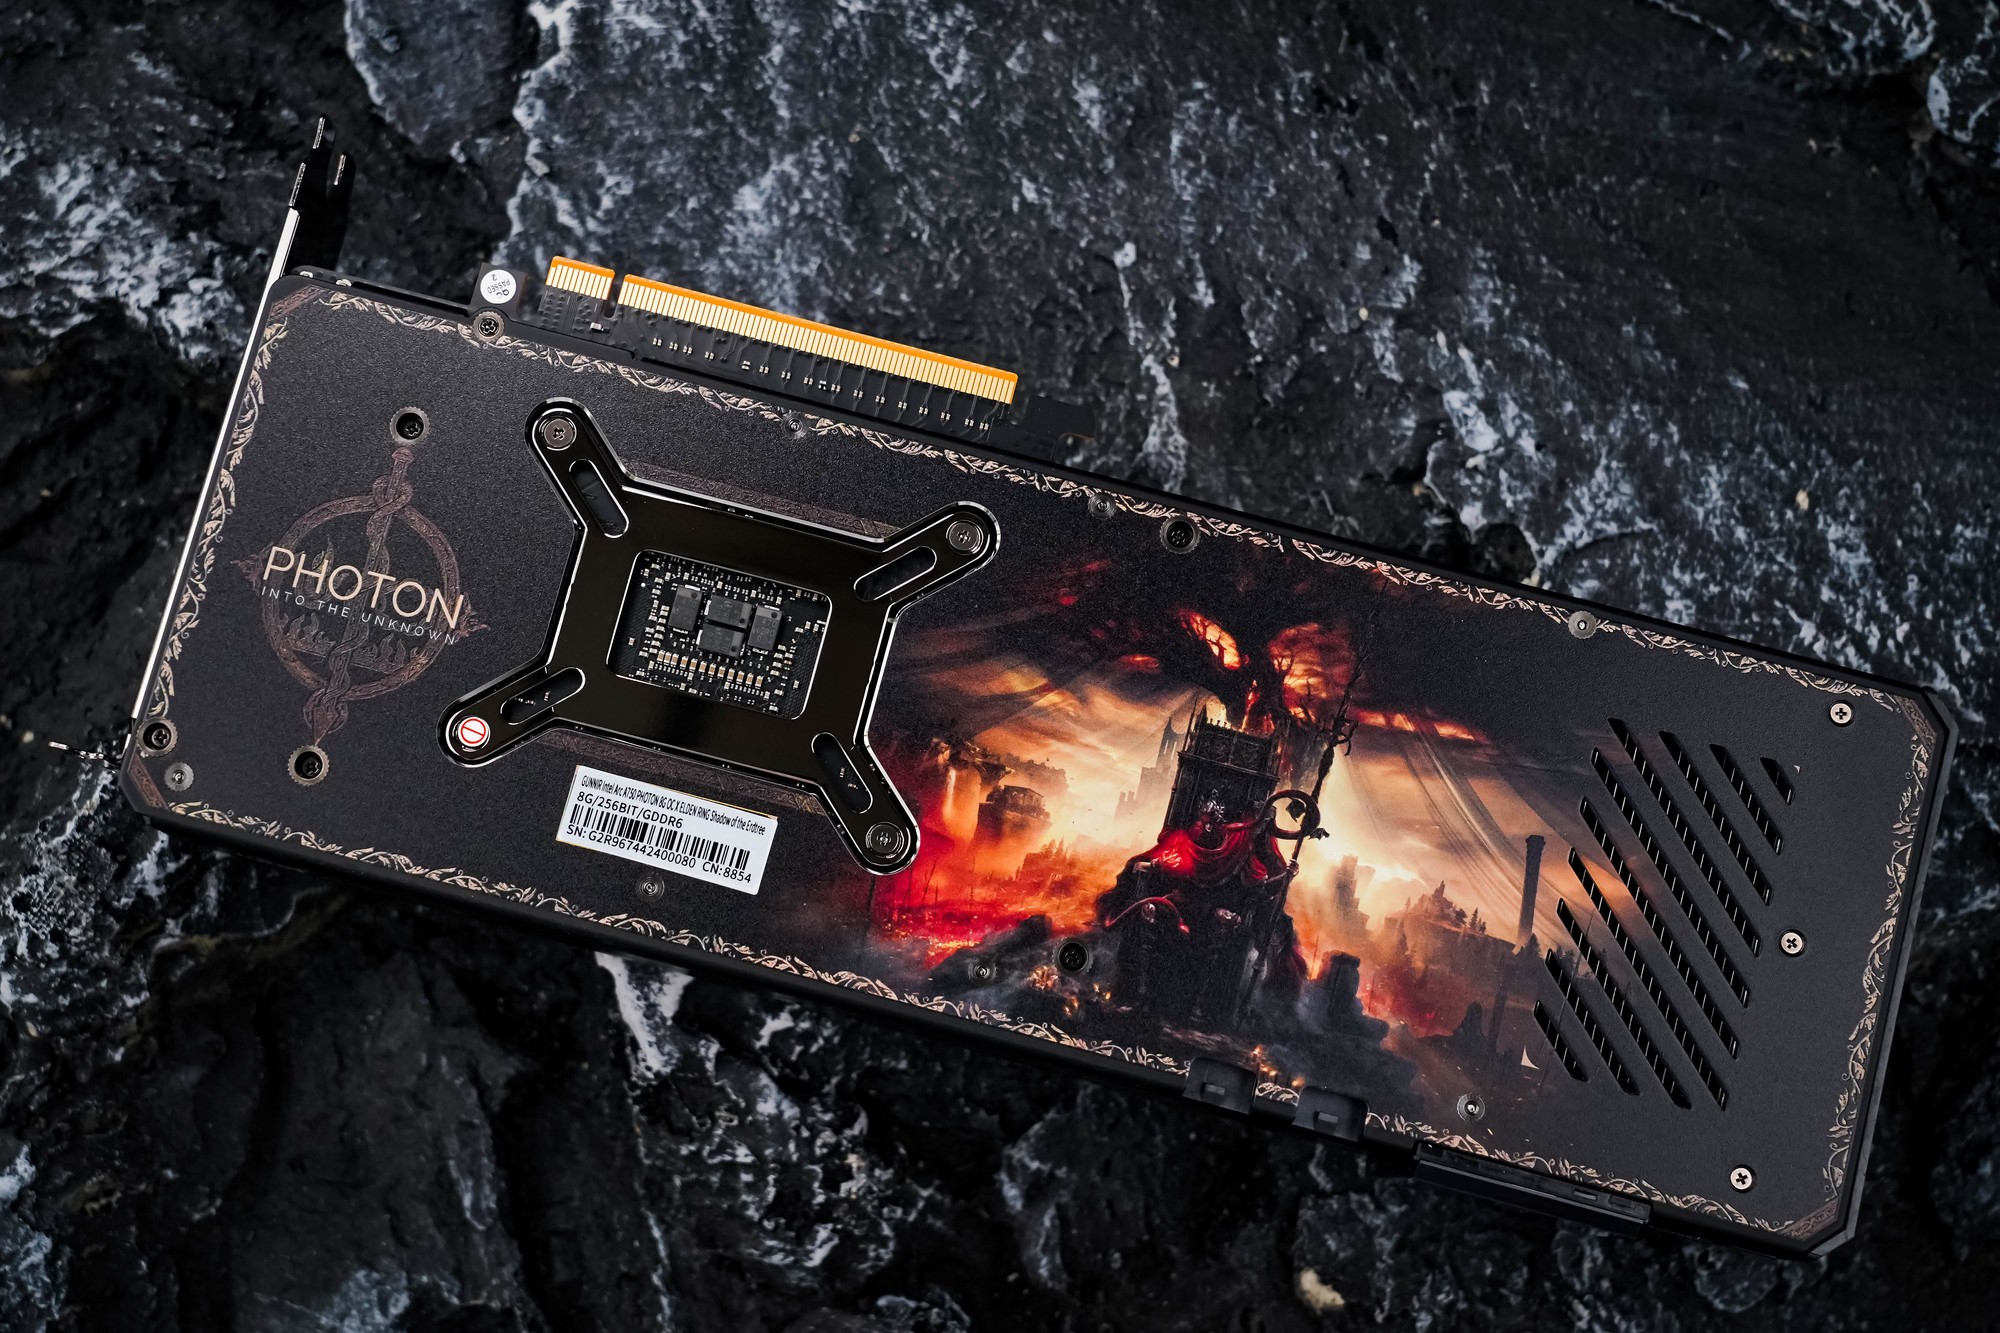  Blue halberd A750 Elden Fahuan DLC co branded graphics card is evaluated to be more cost-effective